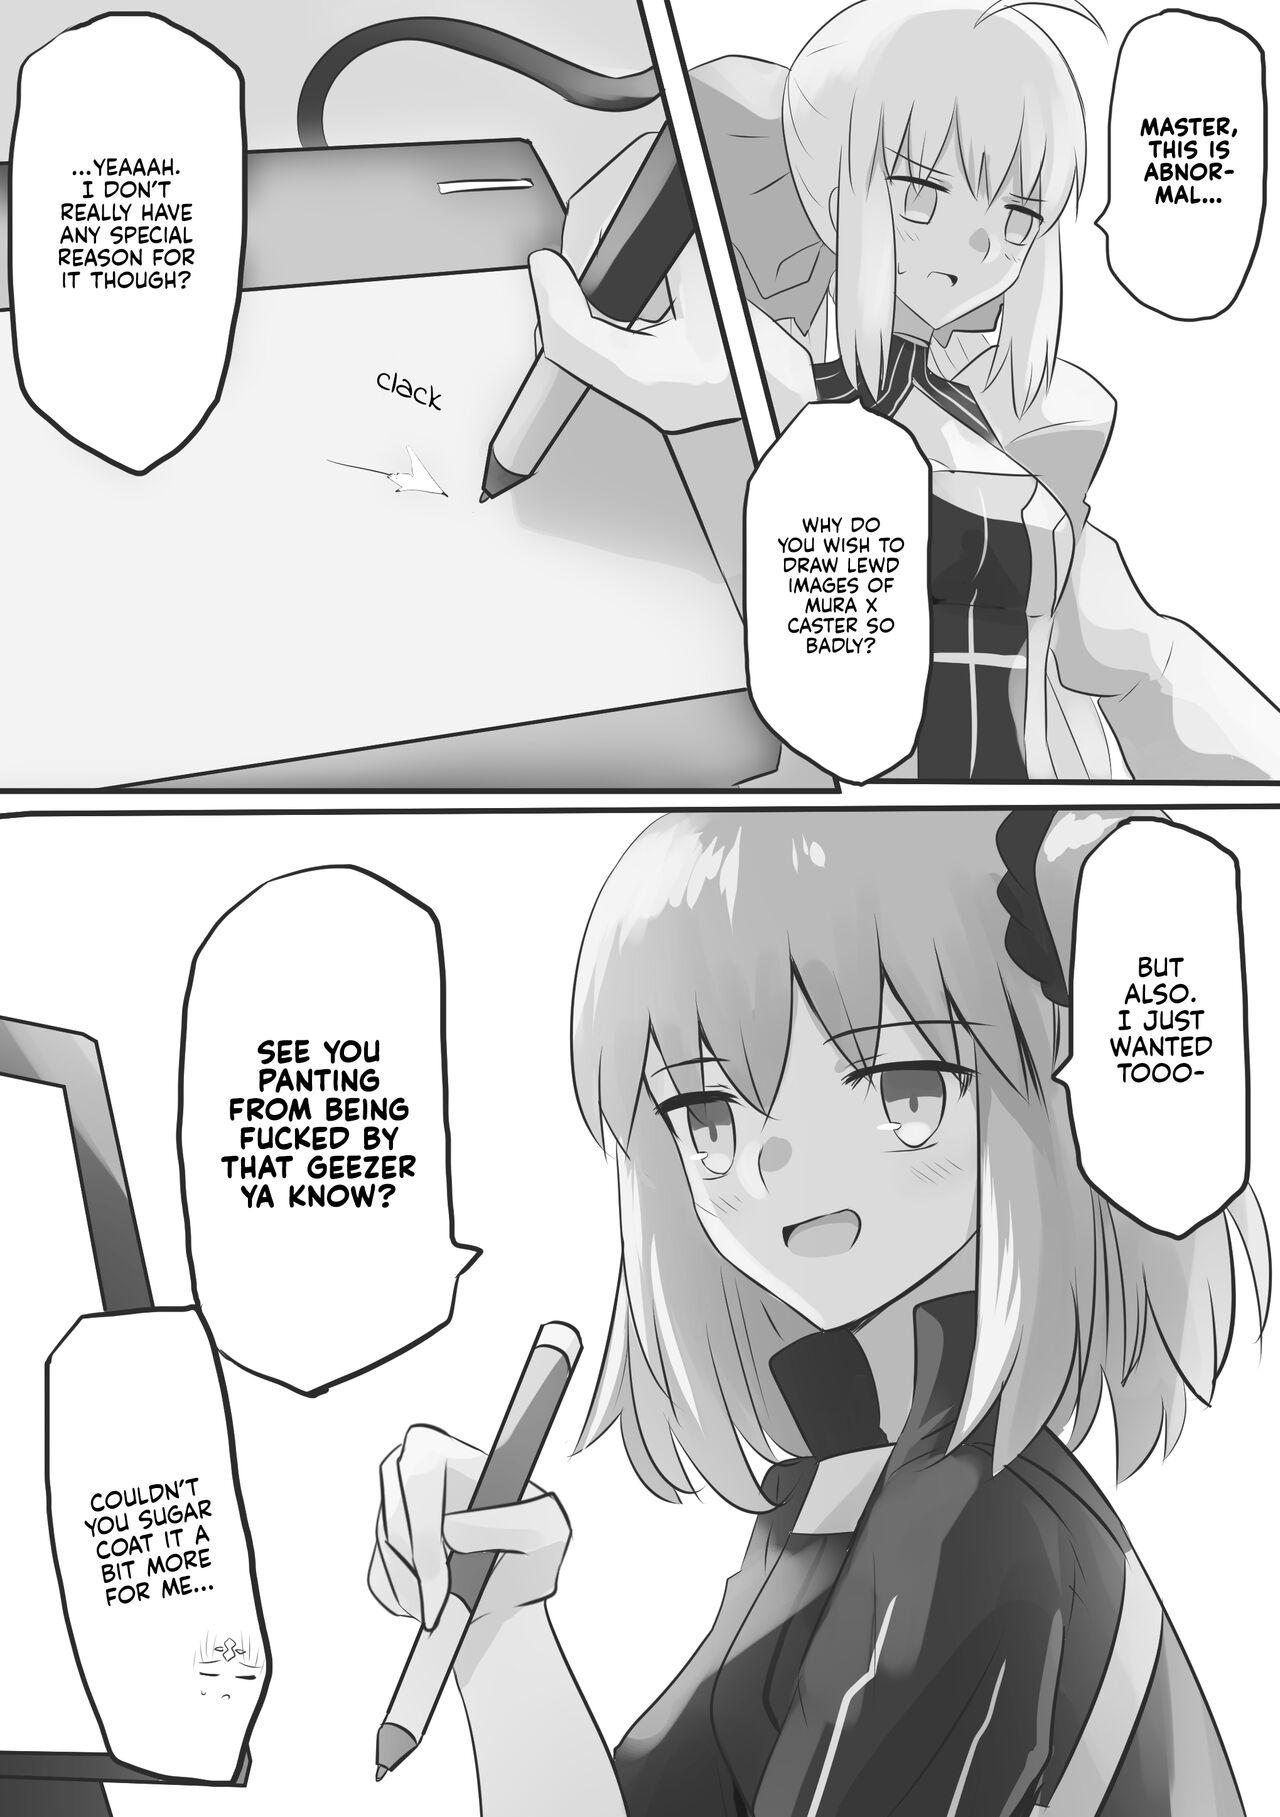 Old Man Mura x Caster 1 - Fate grand order Step Sister - Page 3